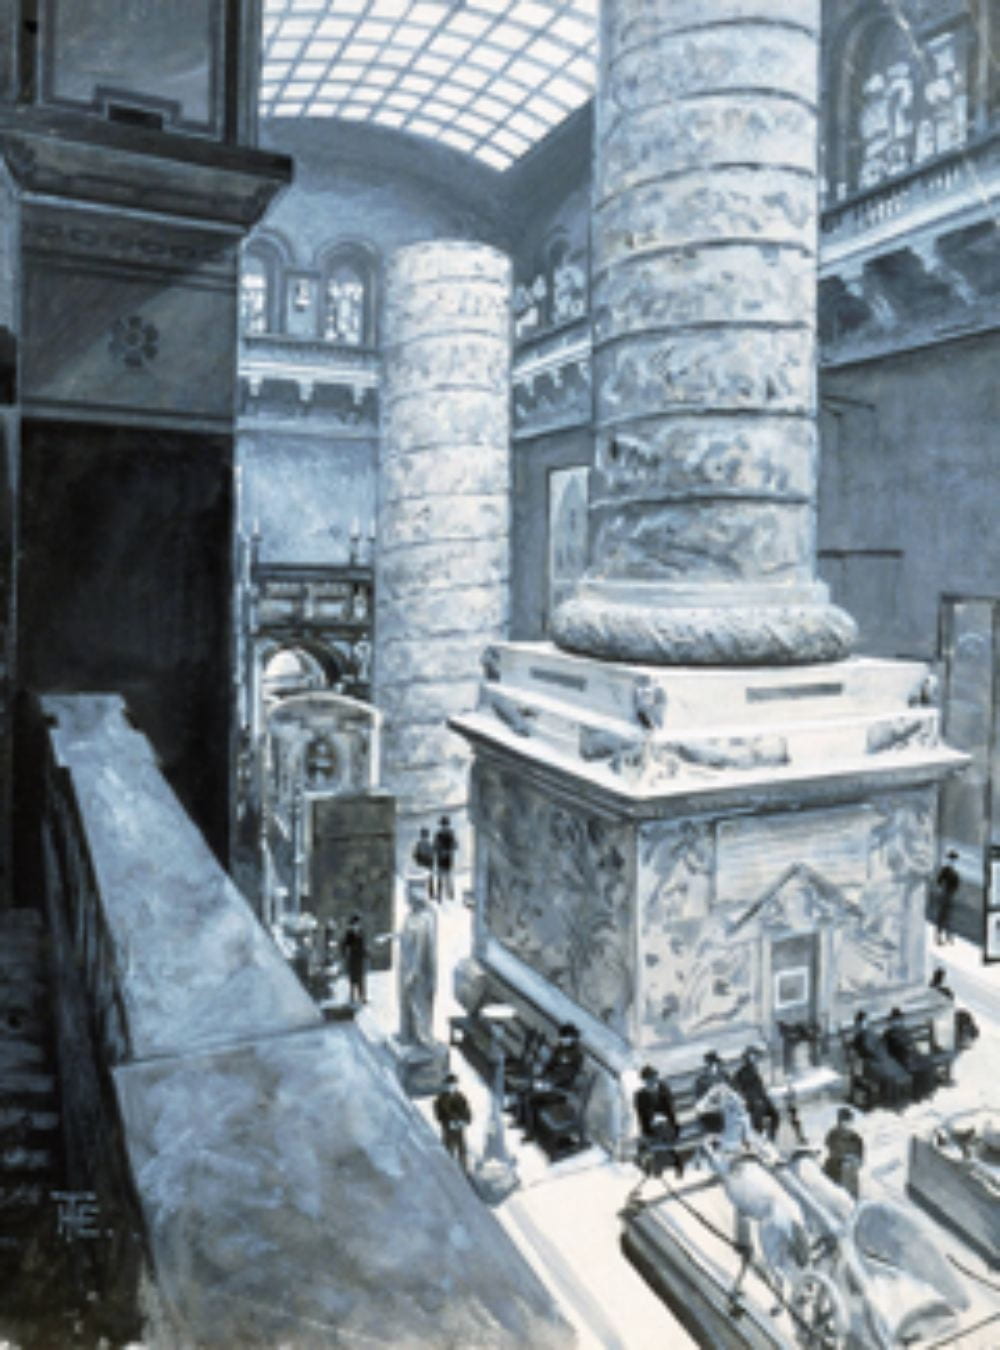 Alt Text: A black and white drawing looking down from a balcony into a museum gallery. Plaster casts of various classical and Renaissance sculpture clutter the floors surrounding a giant column in two pieces. People dressed in dark clothing sit on benches at the base of the column, some of them sketching.